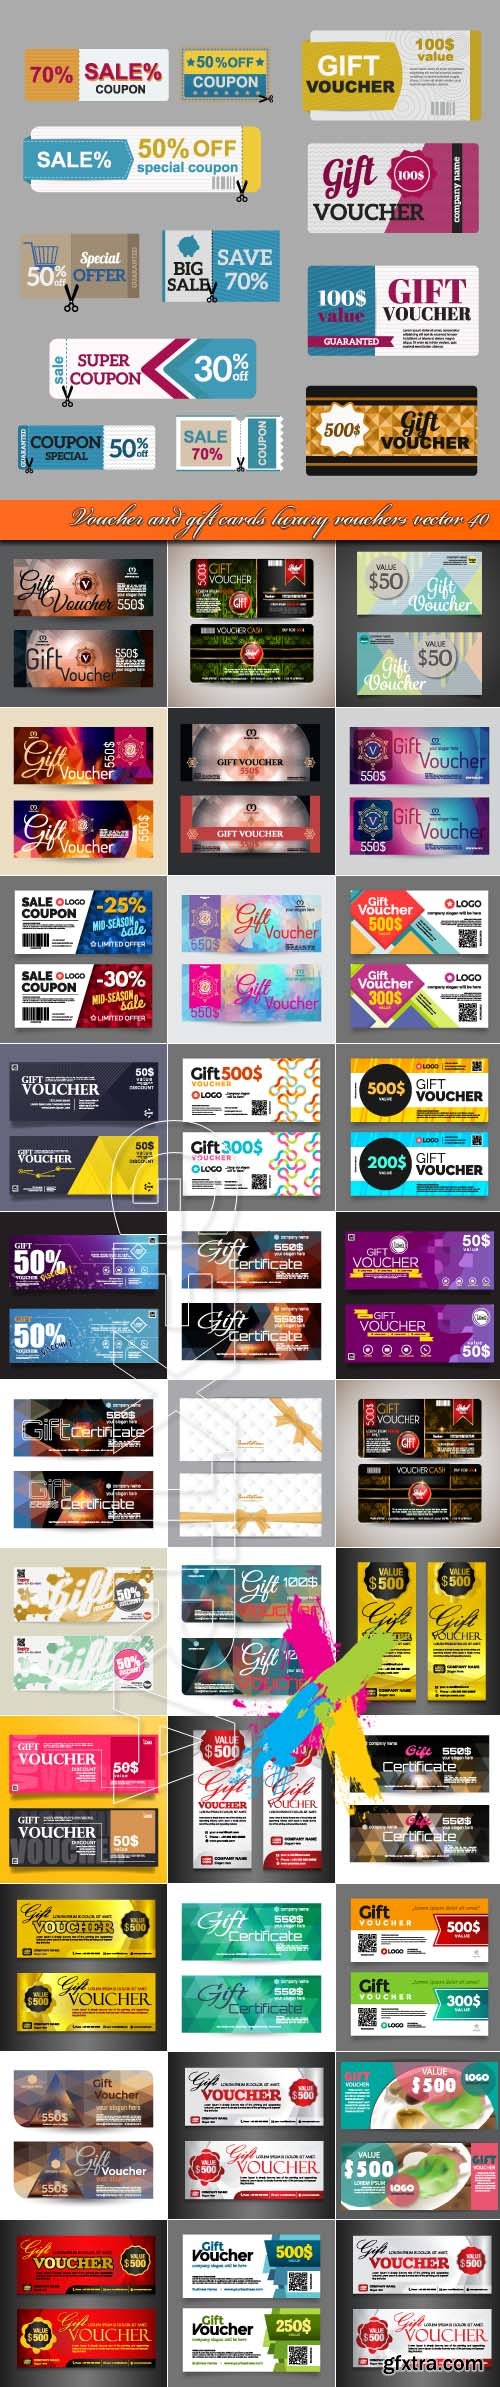 Voucher and gift cards luxury vouchers vector 40